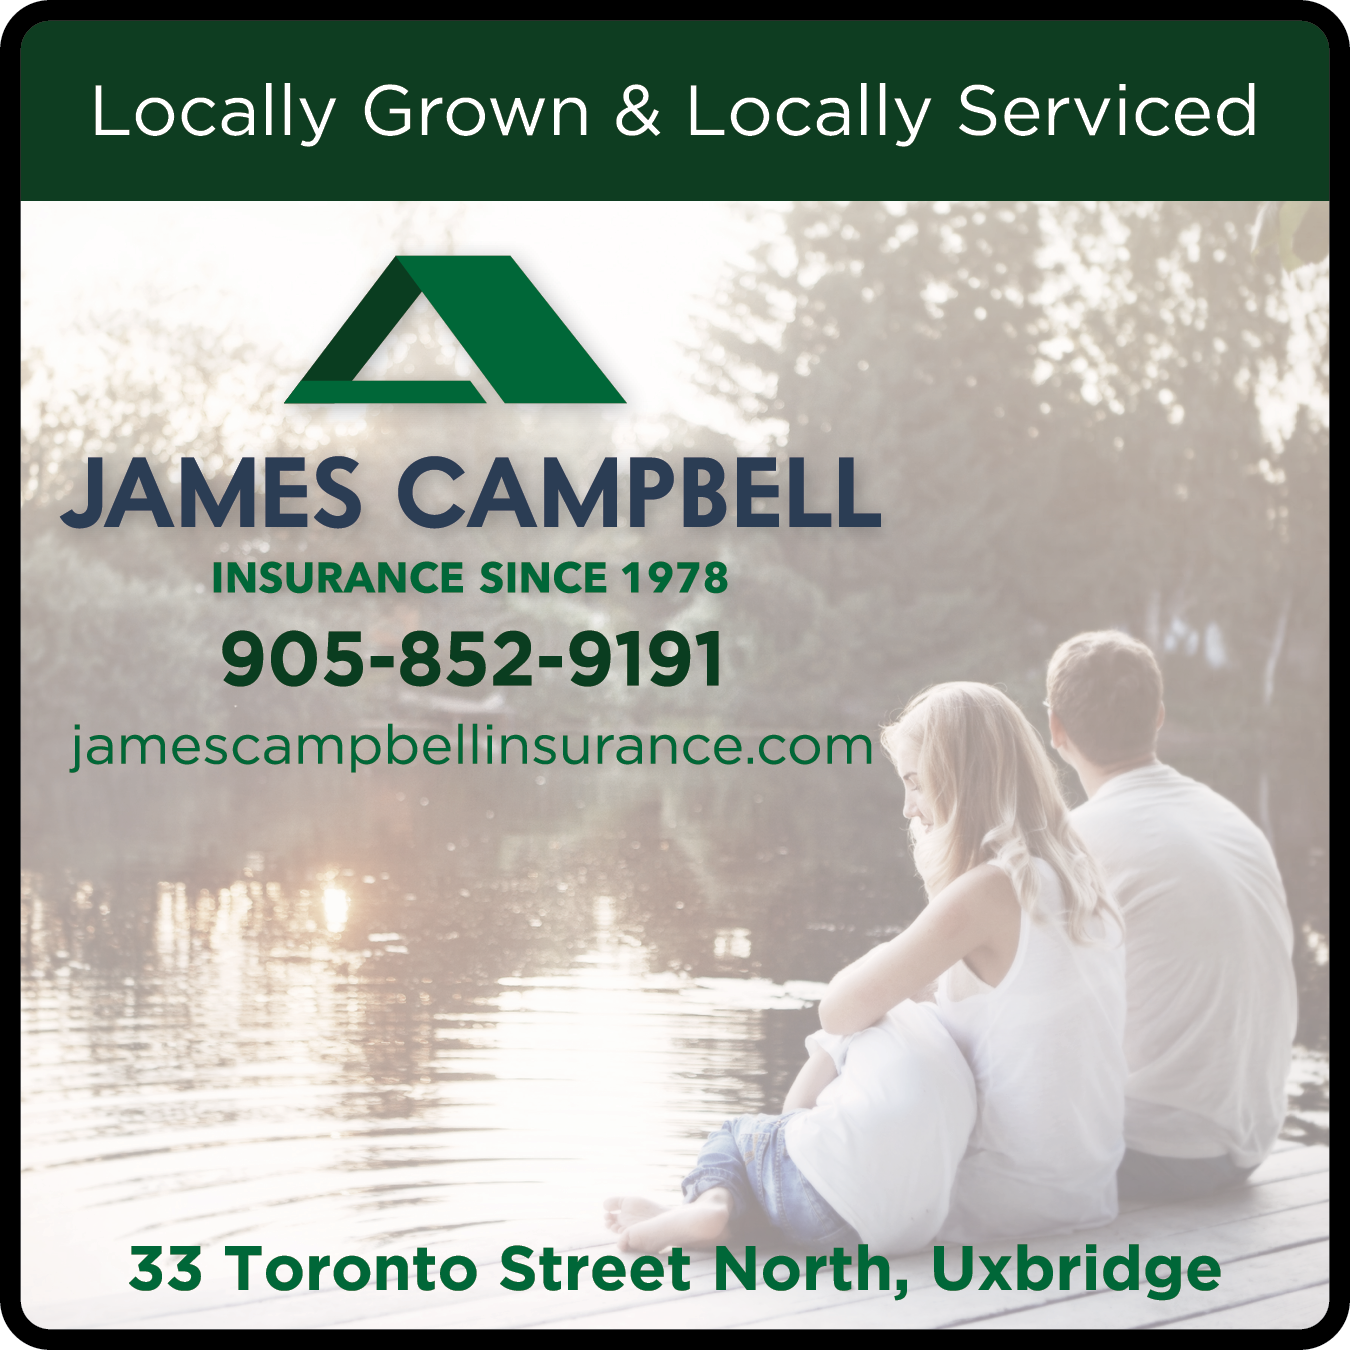 James Campbell Insurance